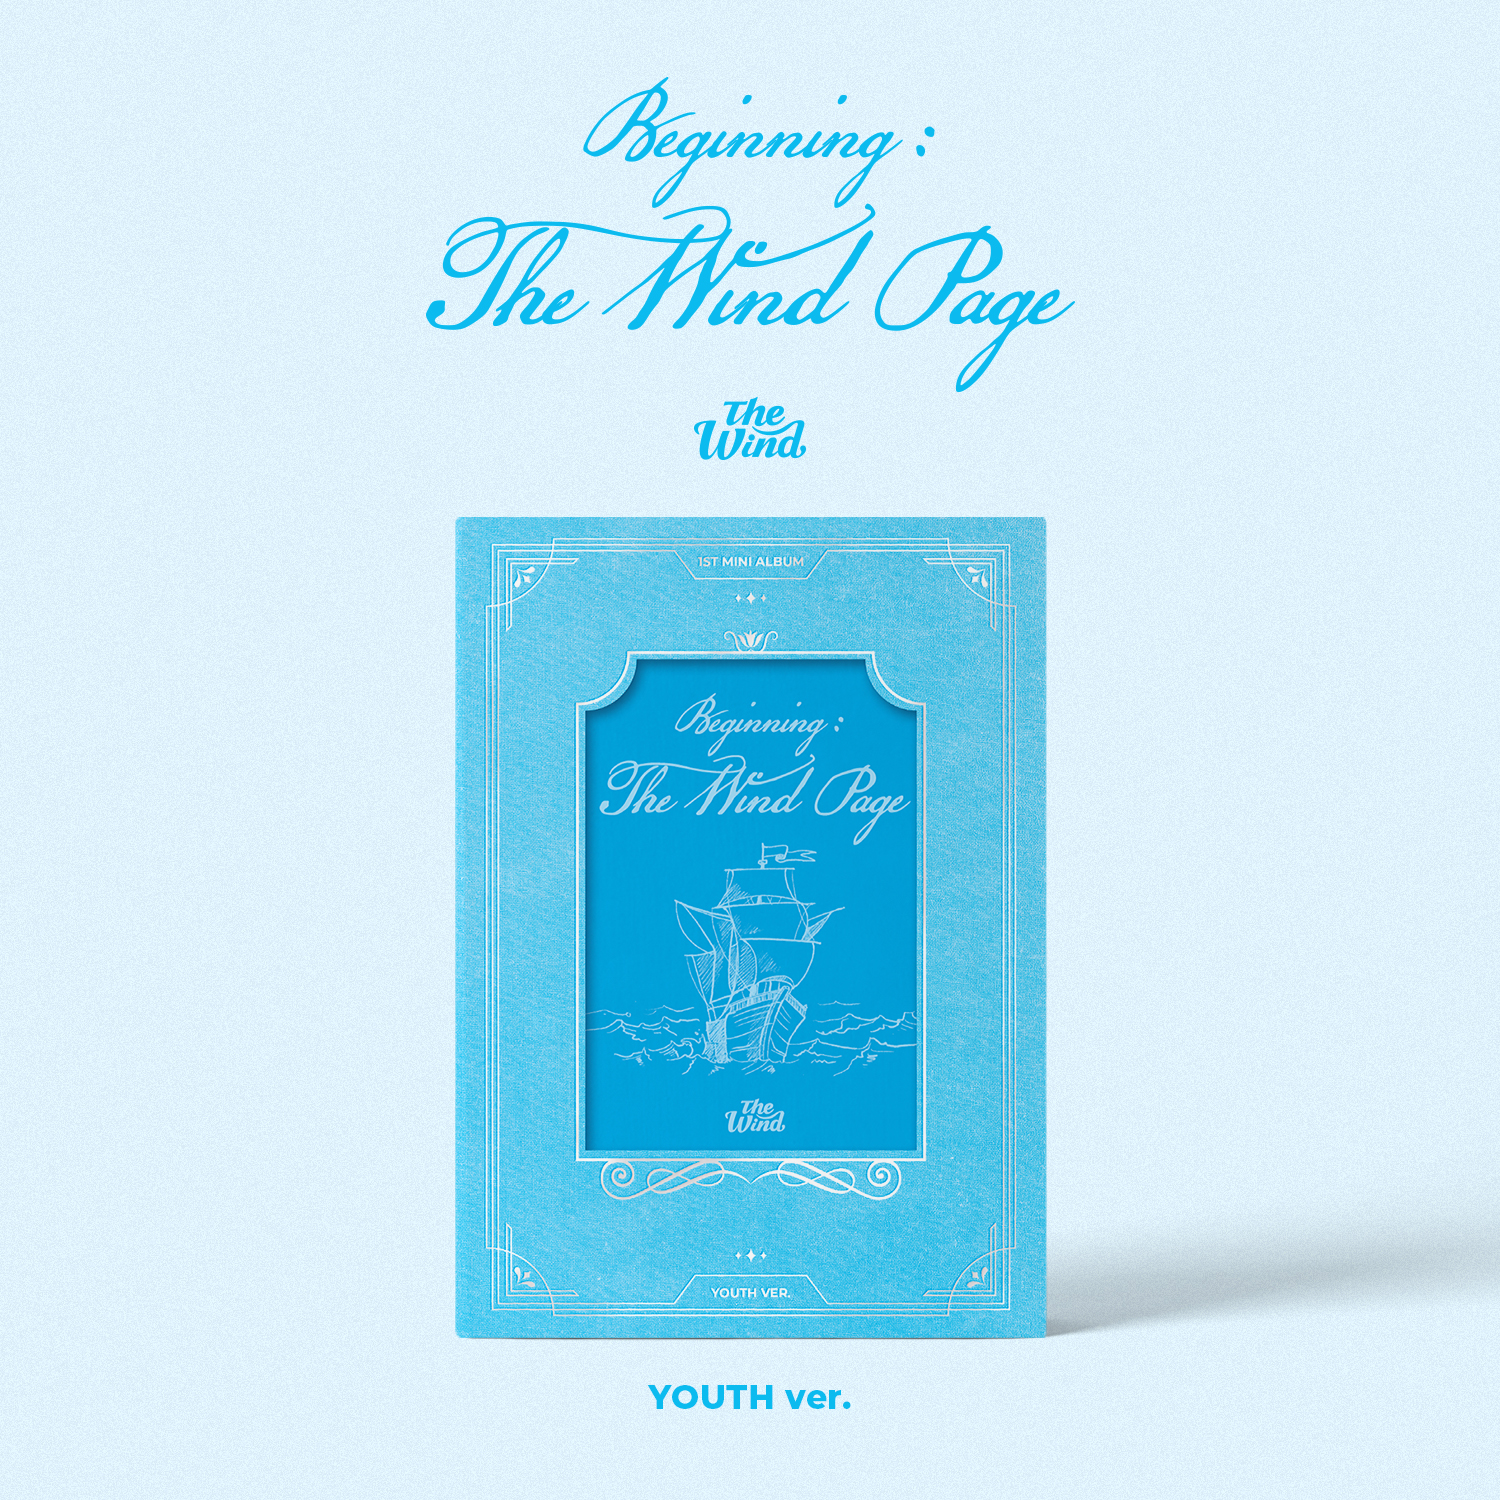 The Wind - 迷你1辑 [Beginning : The Wind Page] (YOUTH Ver.)